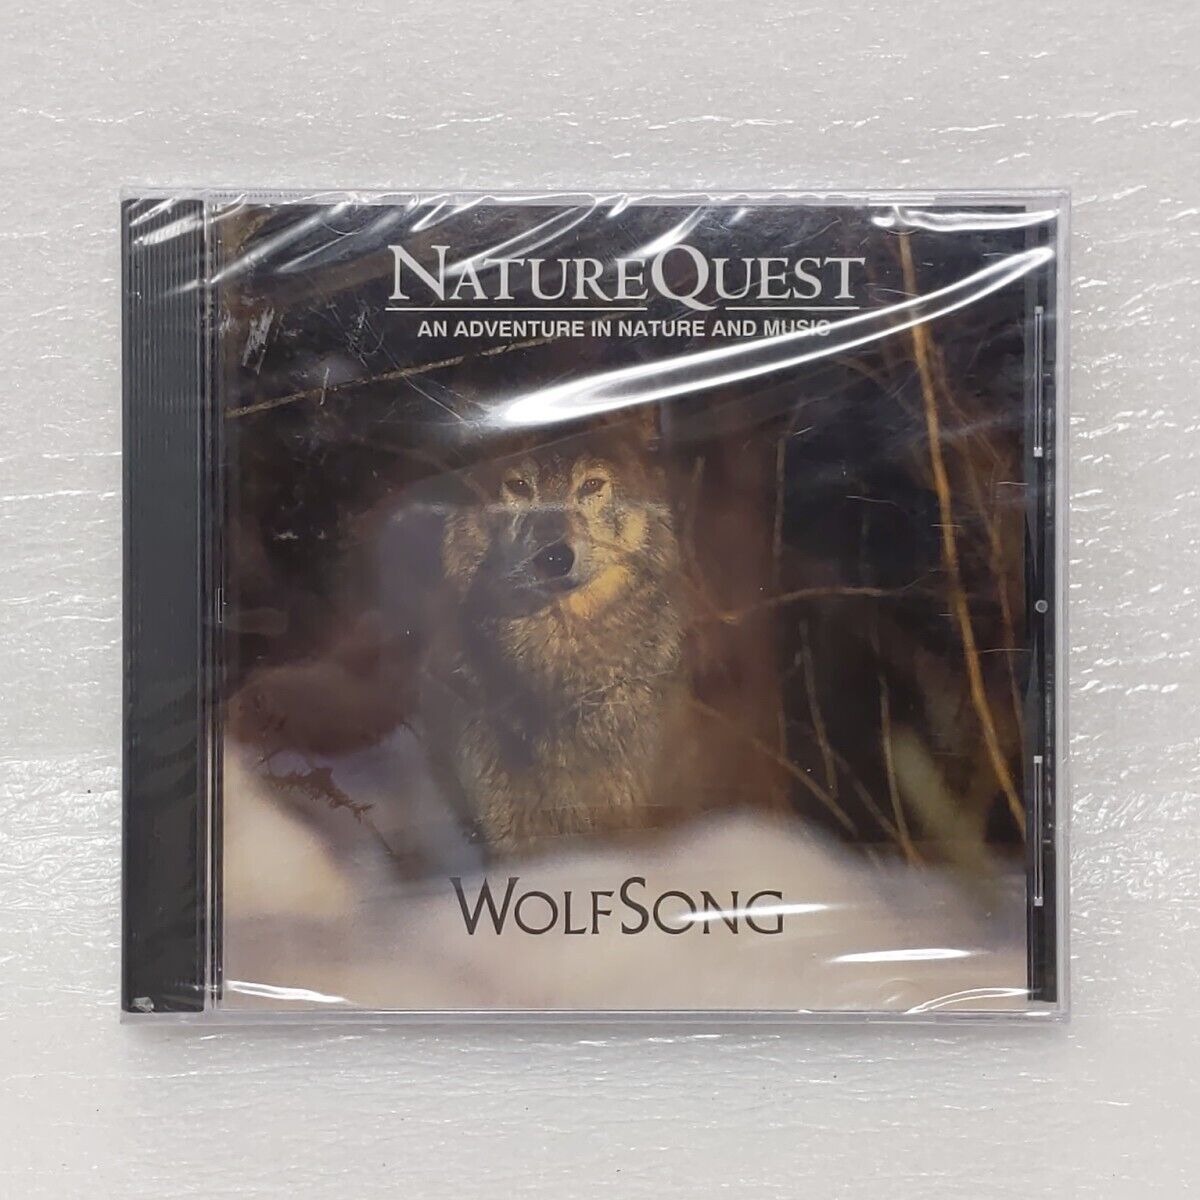 NEW Vintage Nature Quest an Adventure in Nature and Music - Wolf Song (CD)